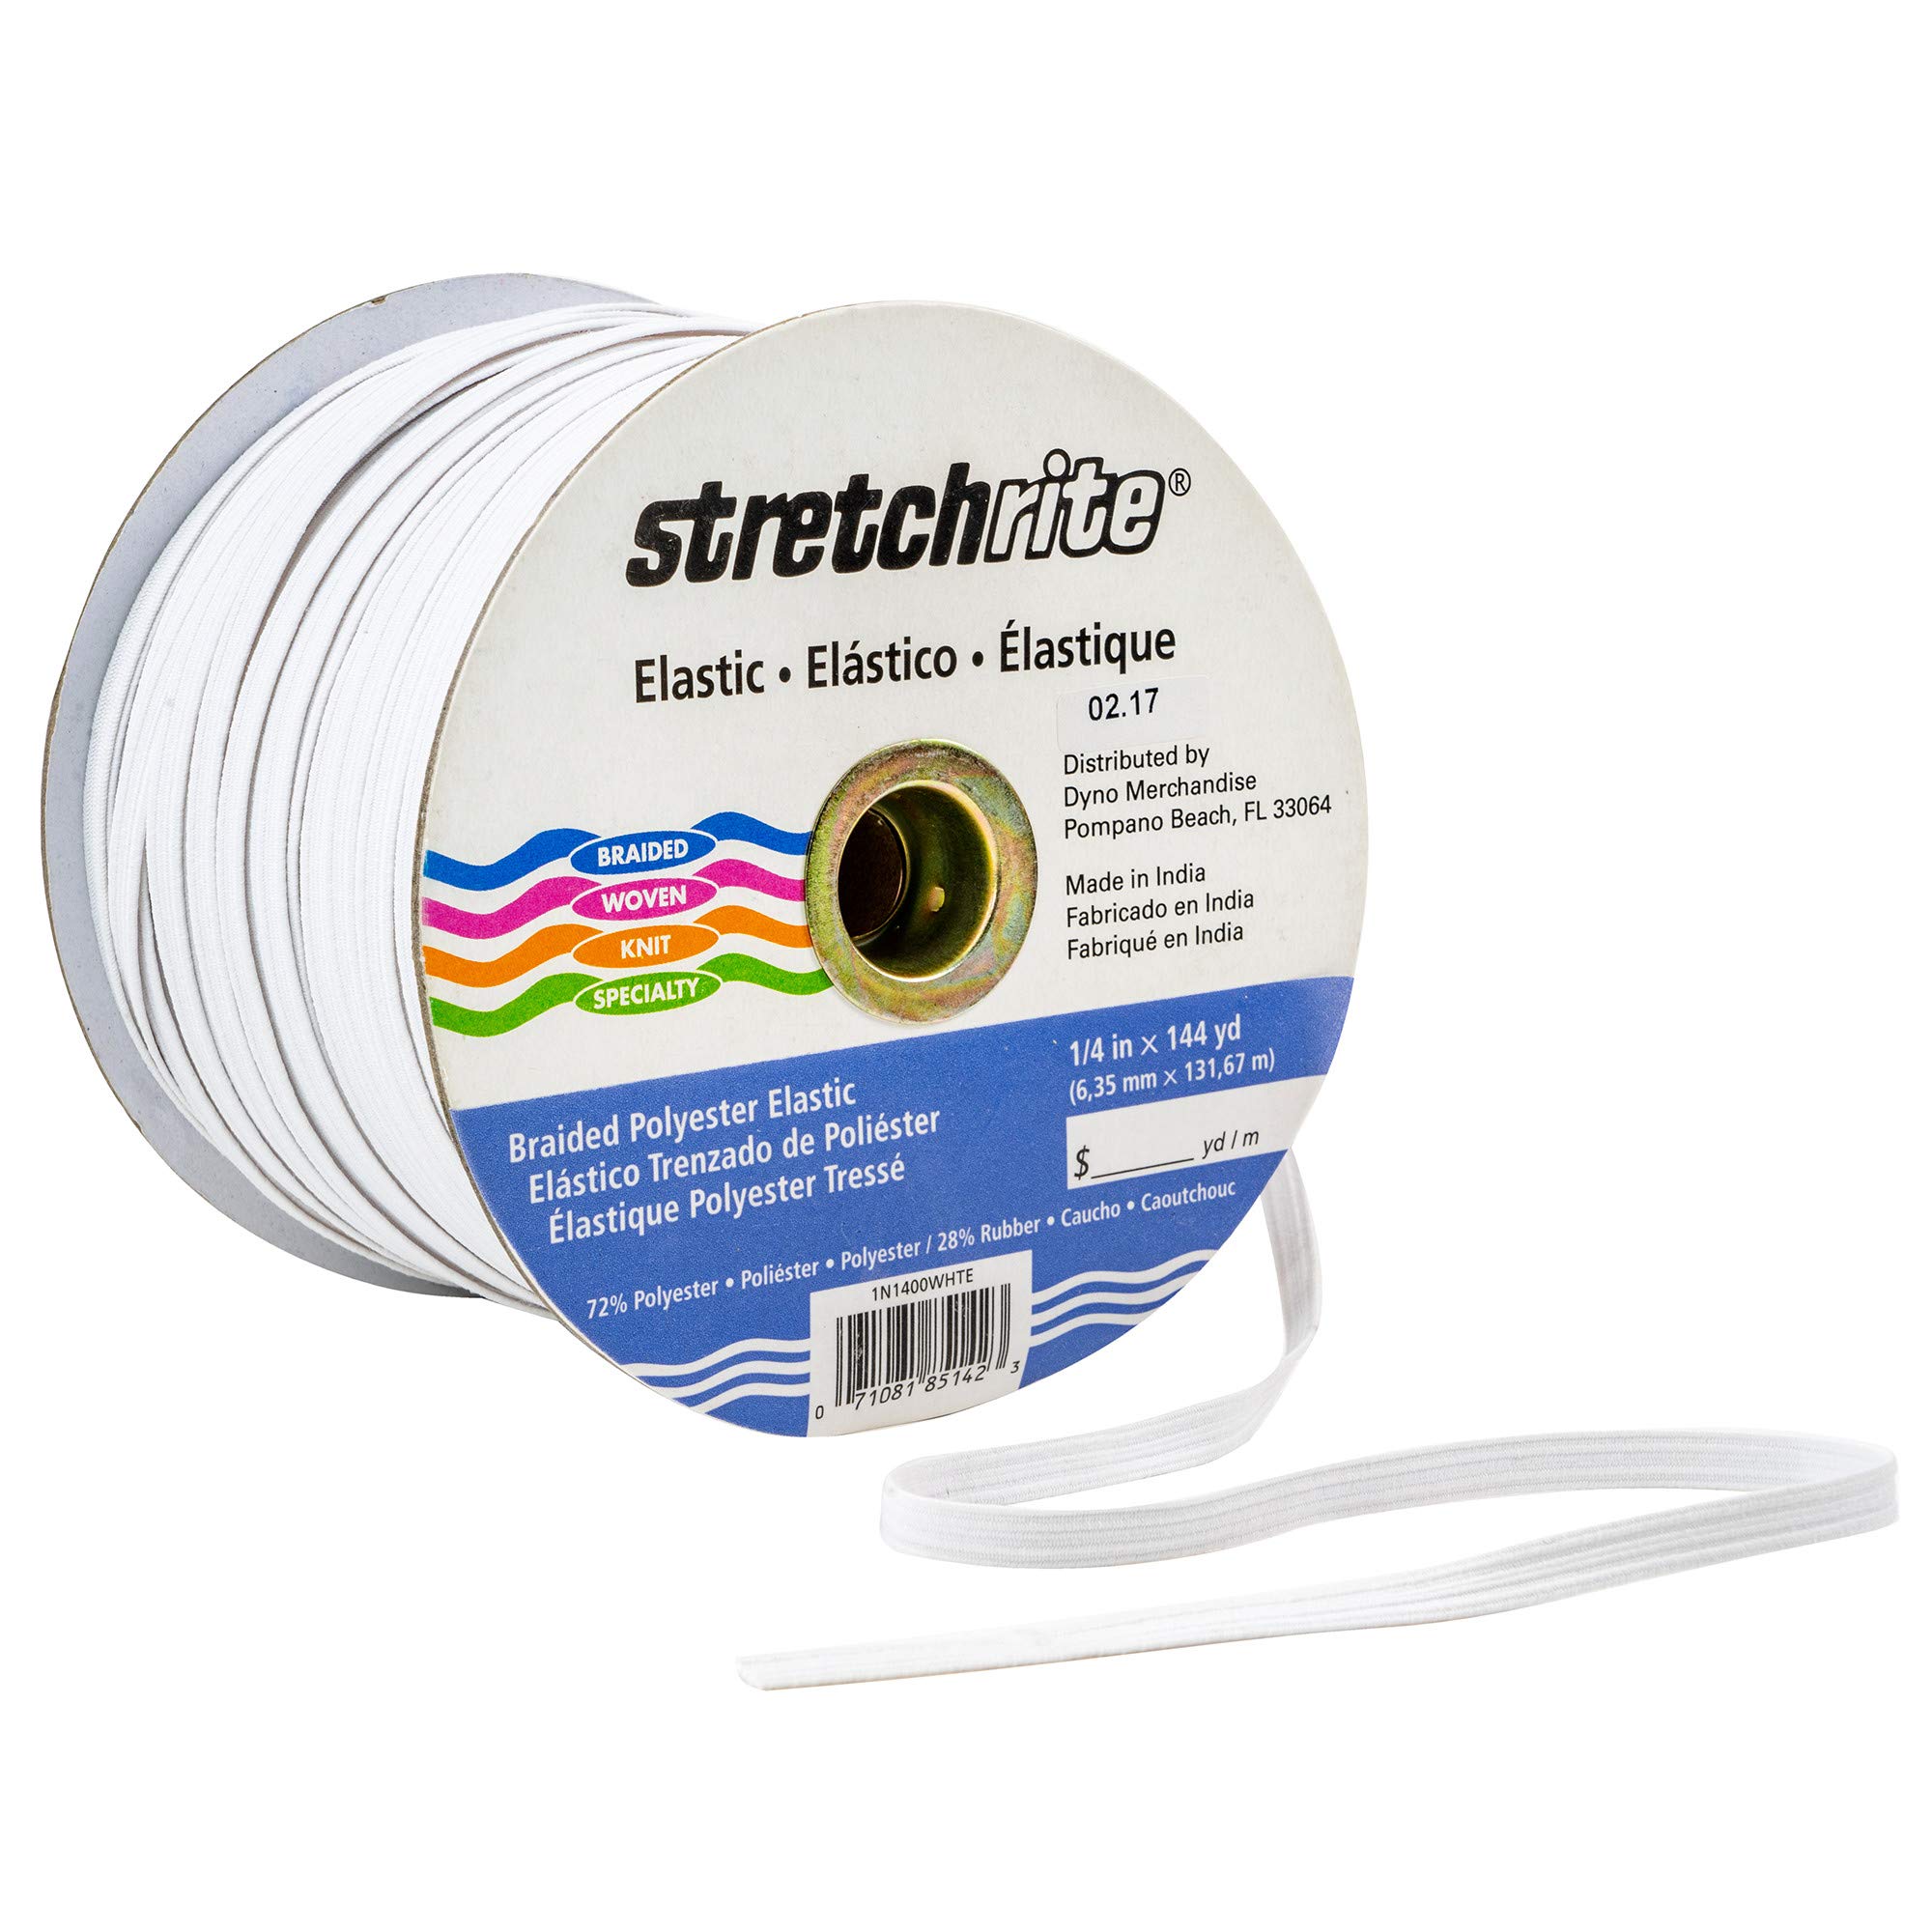 Stretchrite 1/4 Inch Braided Polyester Elastic for Sewing and